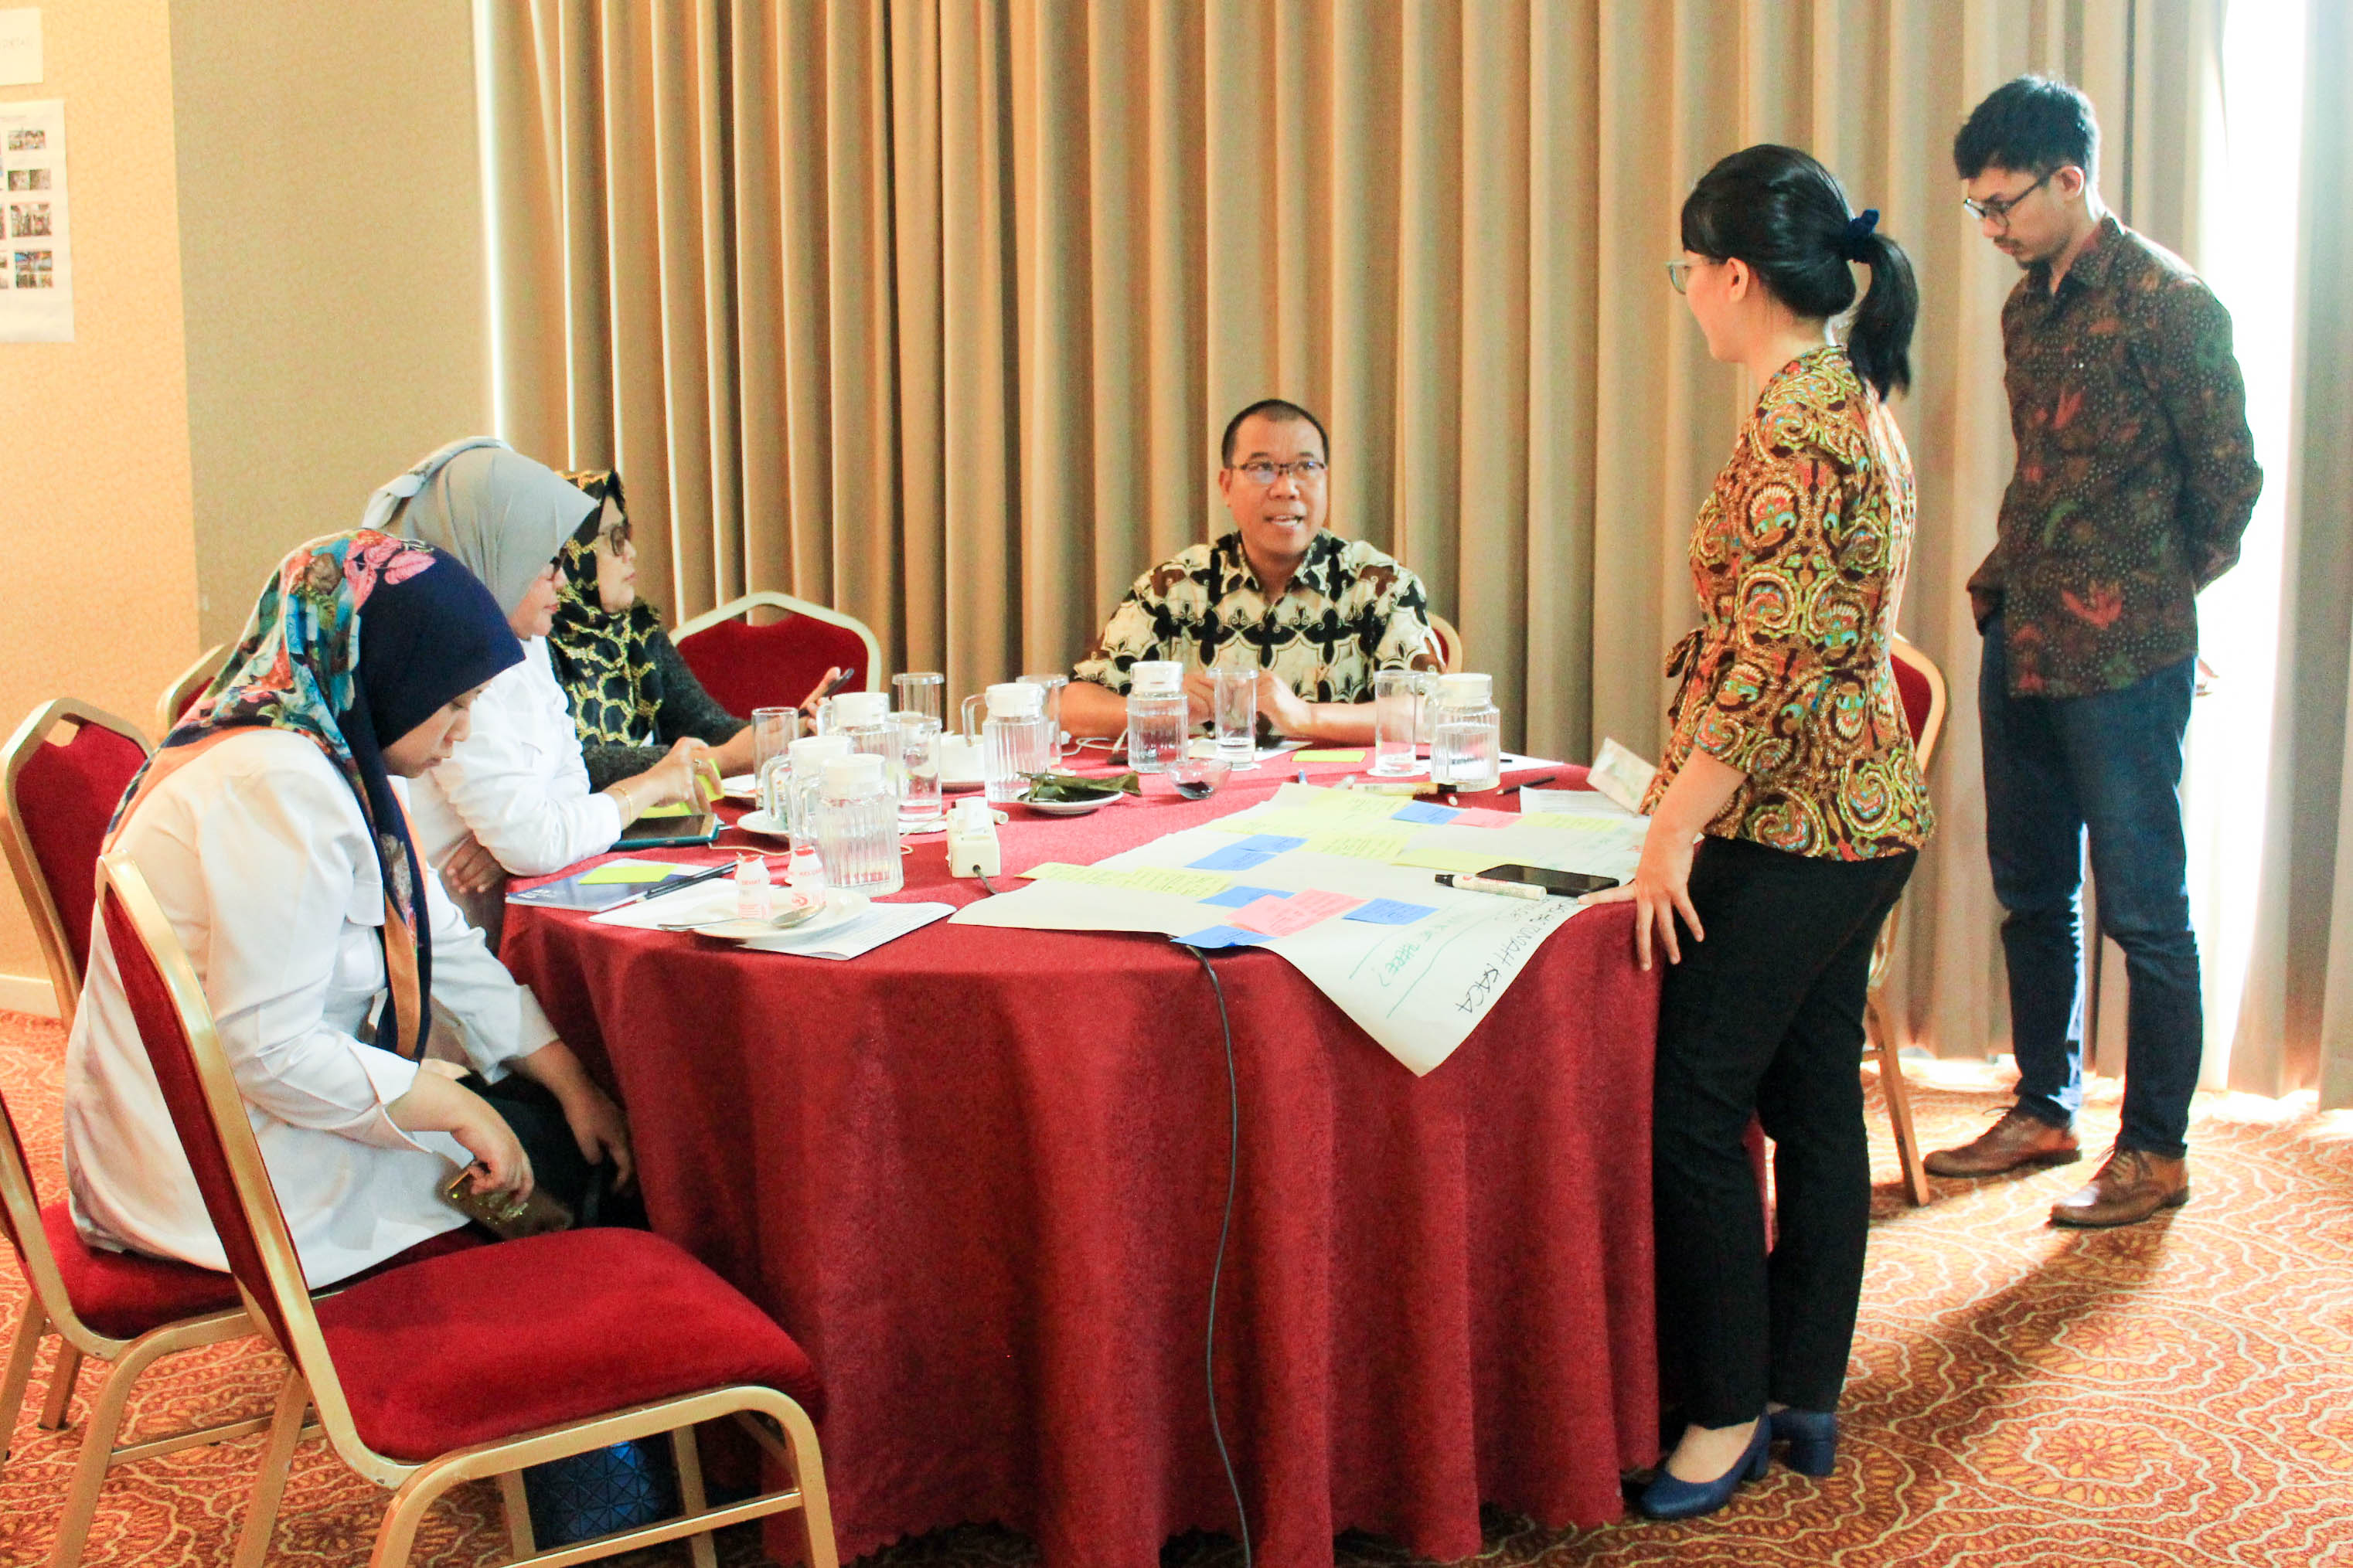 The workshop used Focus Group Discussions (FGD) and the Talanoa dialogue as tools to gather reliable information from national and local government representatives.